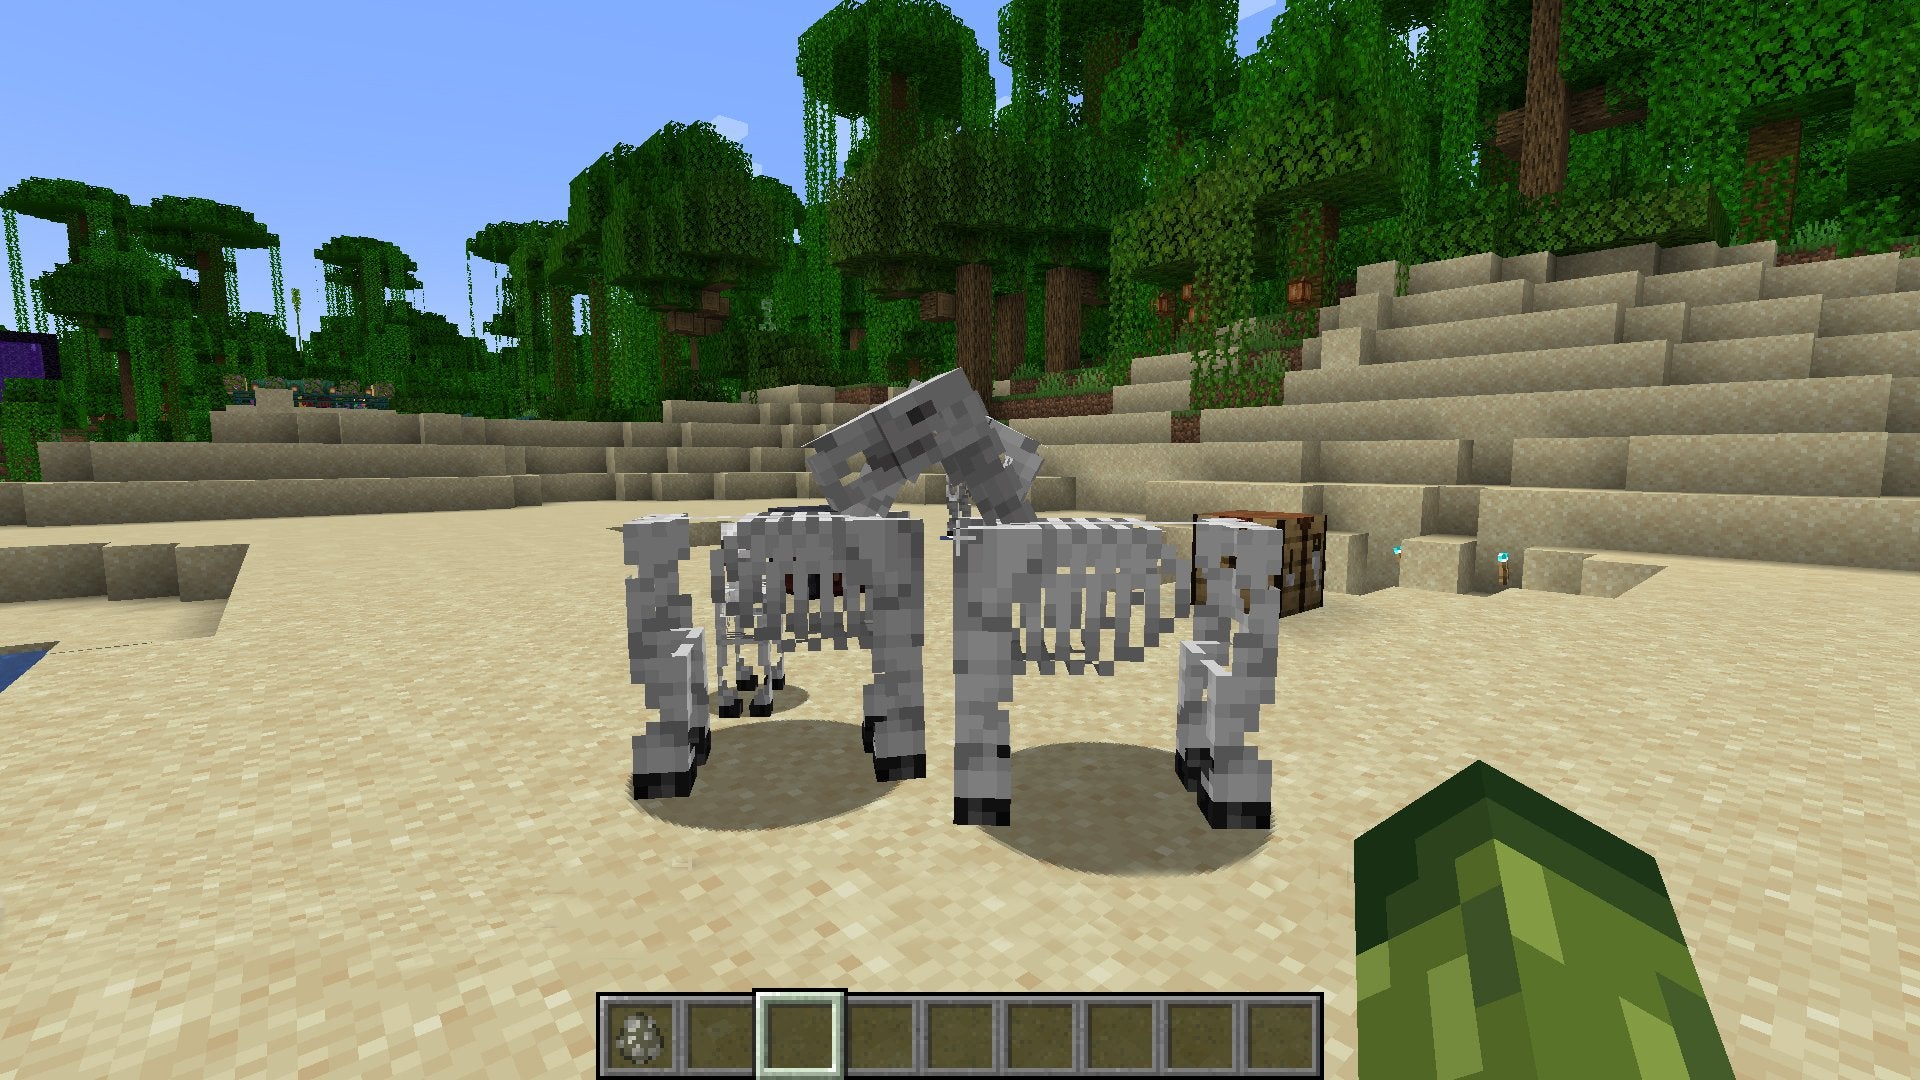 A player spawning Skeleton Horses with Skeleton Horse Spawn Eggs.